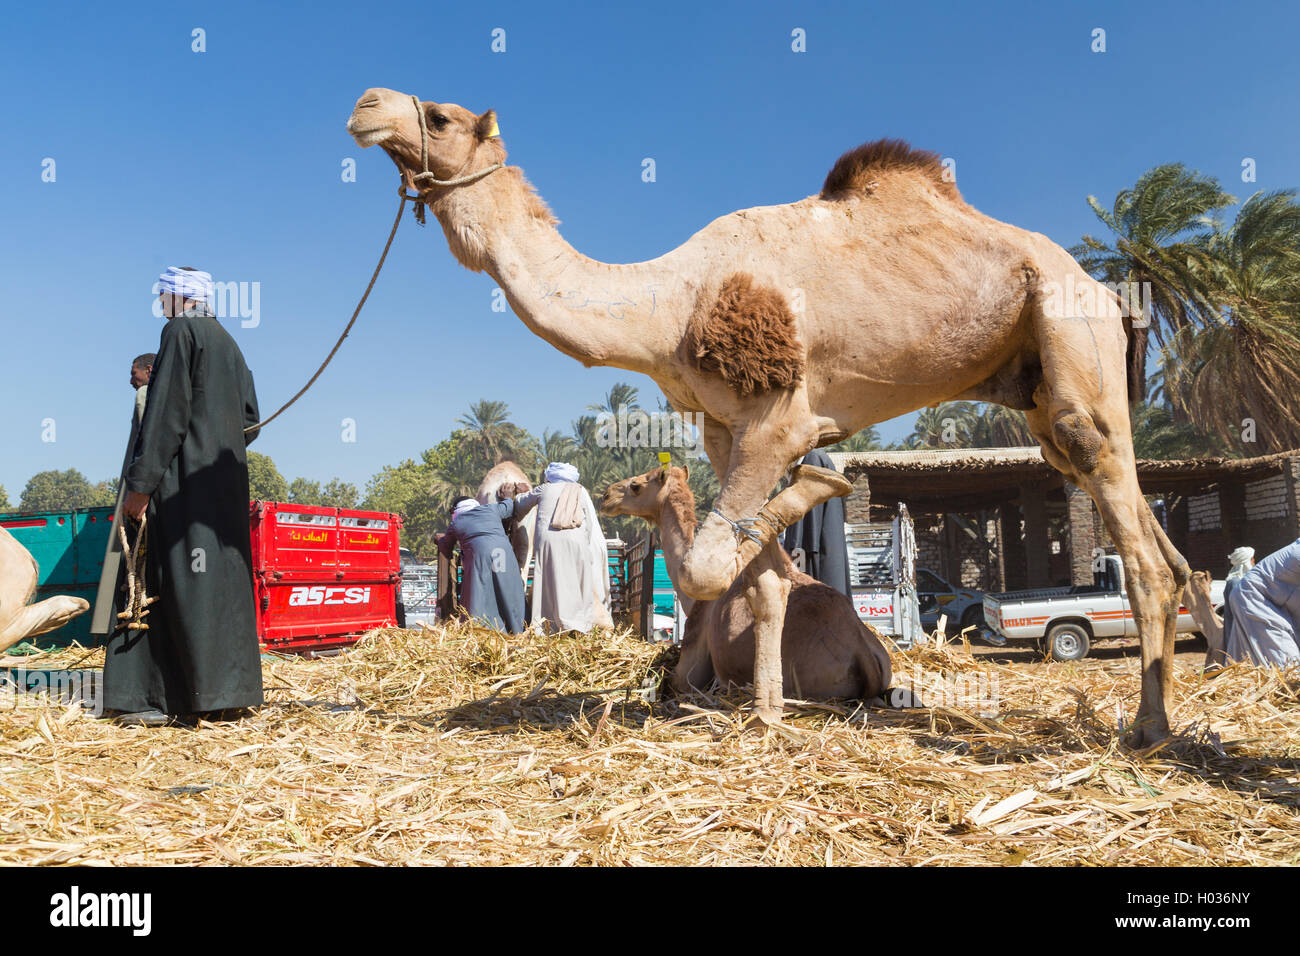 DARAW, EGYPT - FEBRUARY 6, 2016: Local camel salesmen on Camel market unloading camels from pick up trucks. Stock Photo